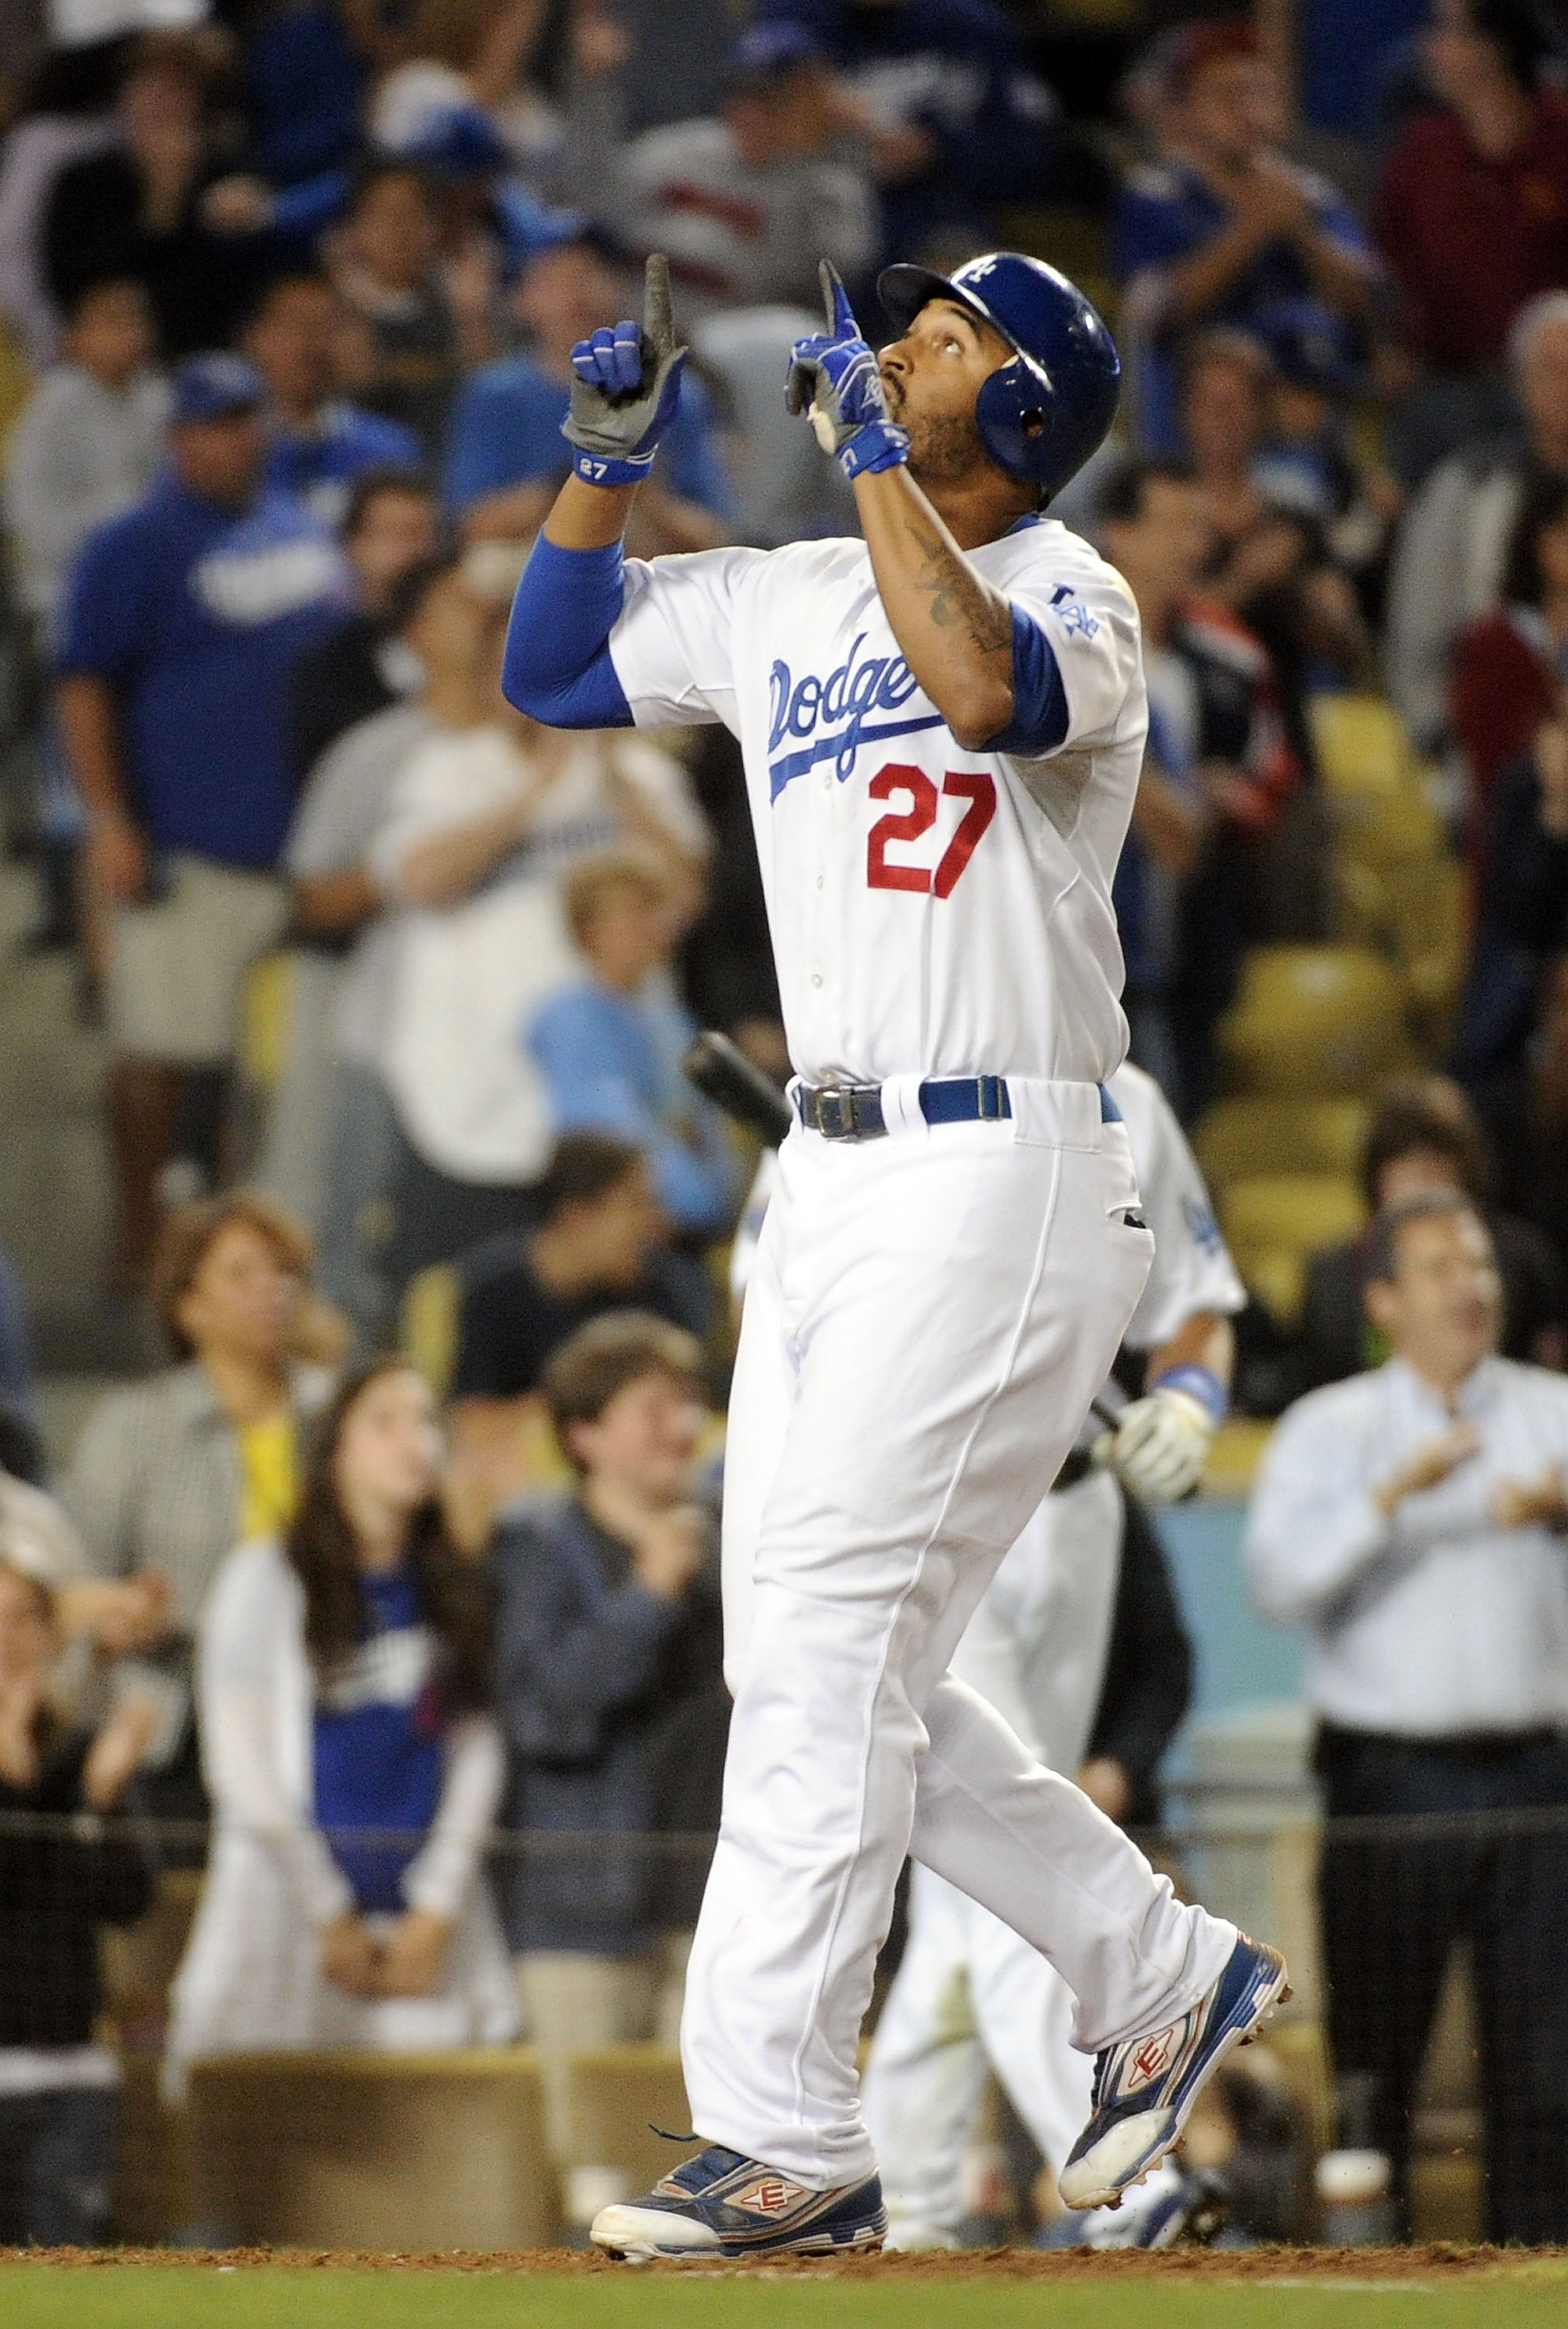 LOS ANGELES, CA - JULY 22:  Matt Kemp #27 of the Los Angeles Dodgers celebrates his homerun for a 2-0 lead over the New York Mets during the seventh inning at Dodger Stadium on July 22, 2010 in Los Angeles, California.  (Photo by Harry How/Getty Images)